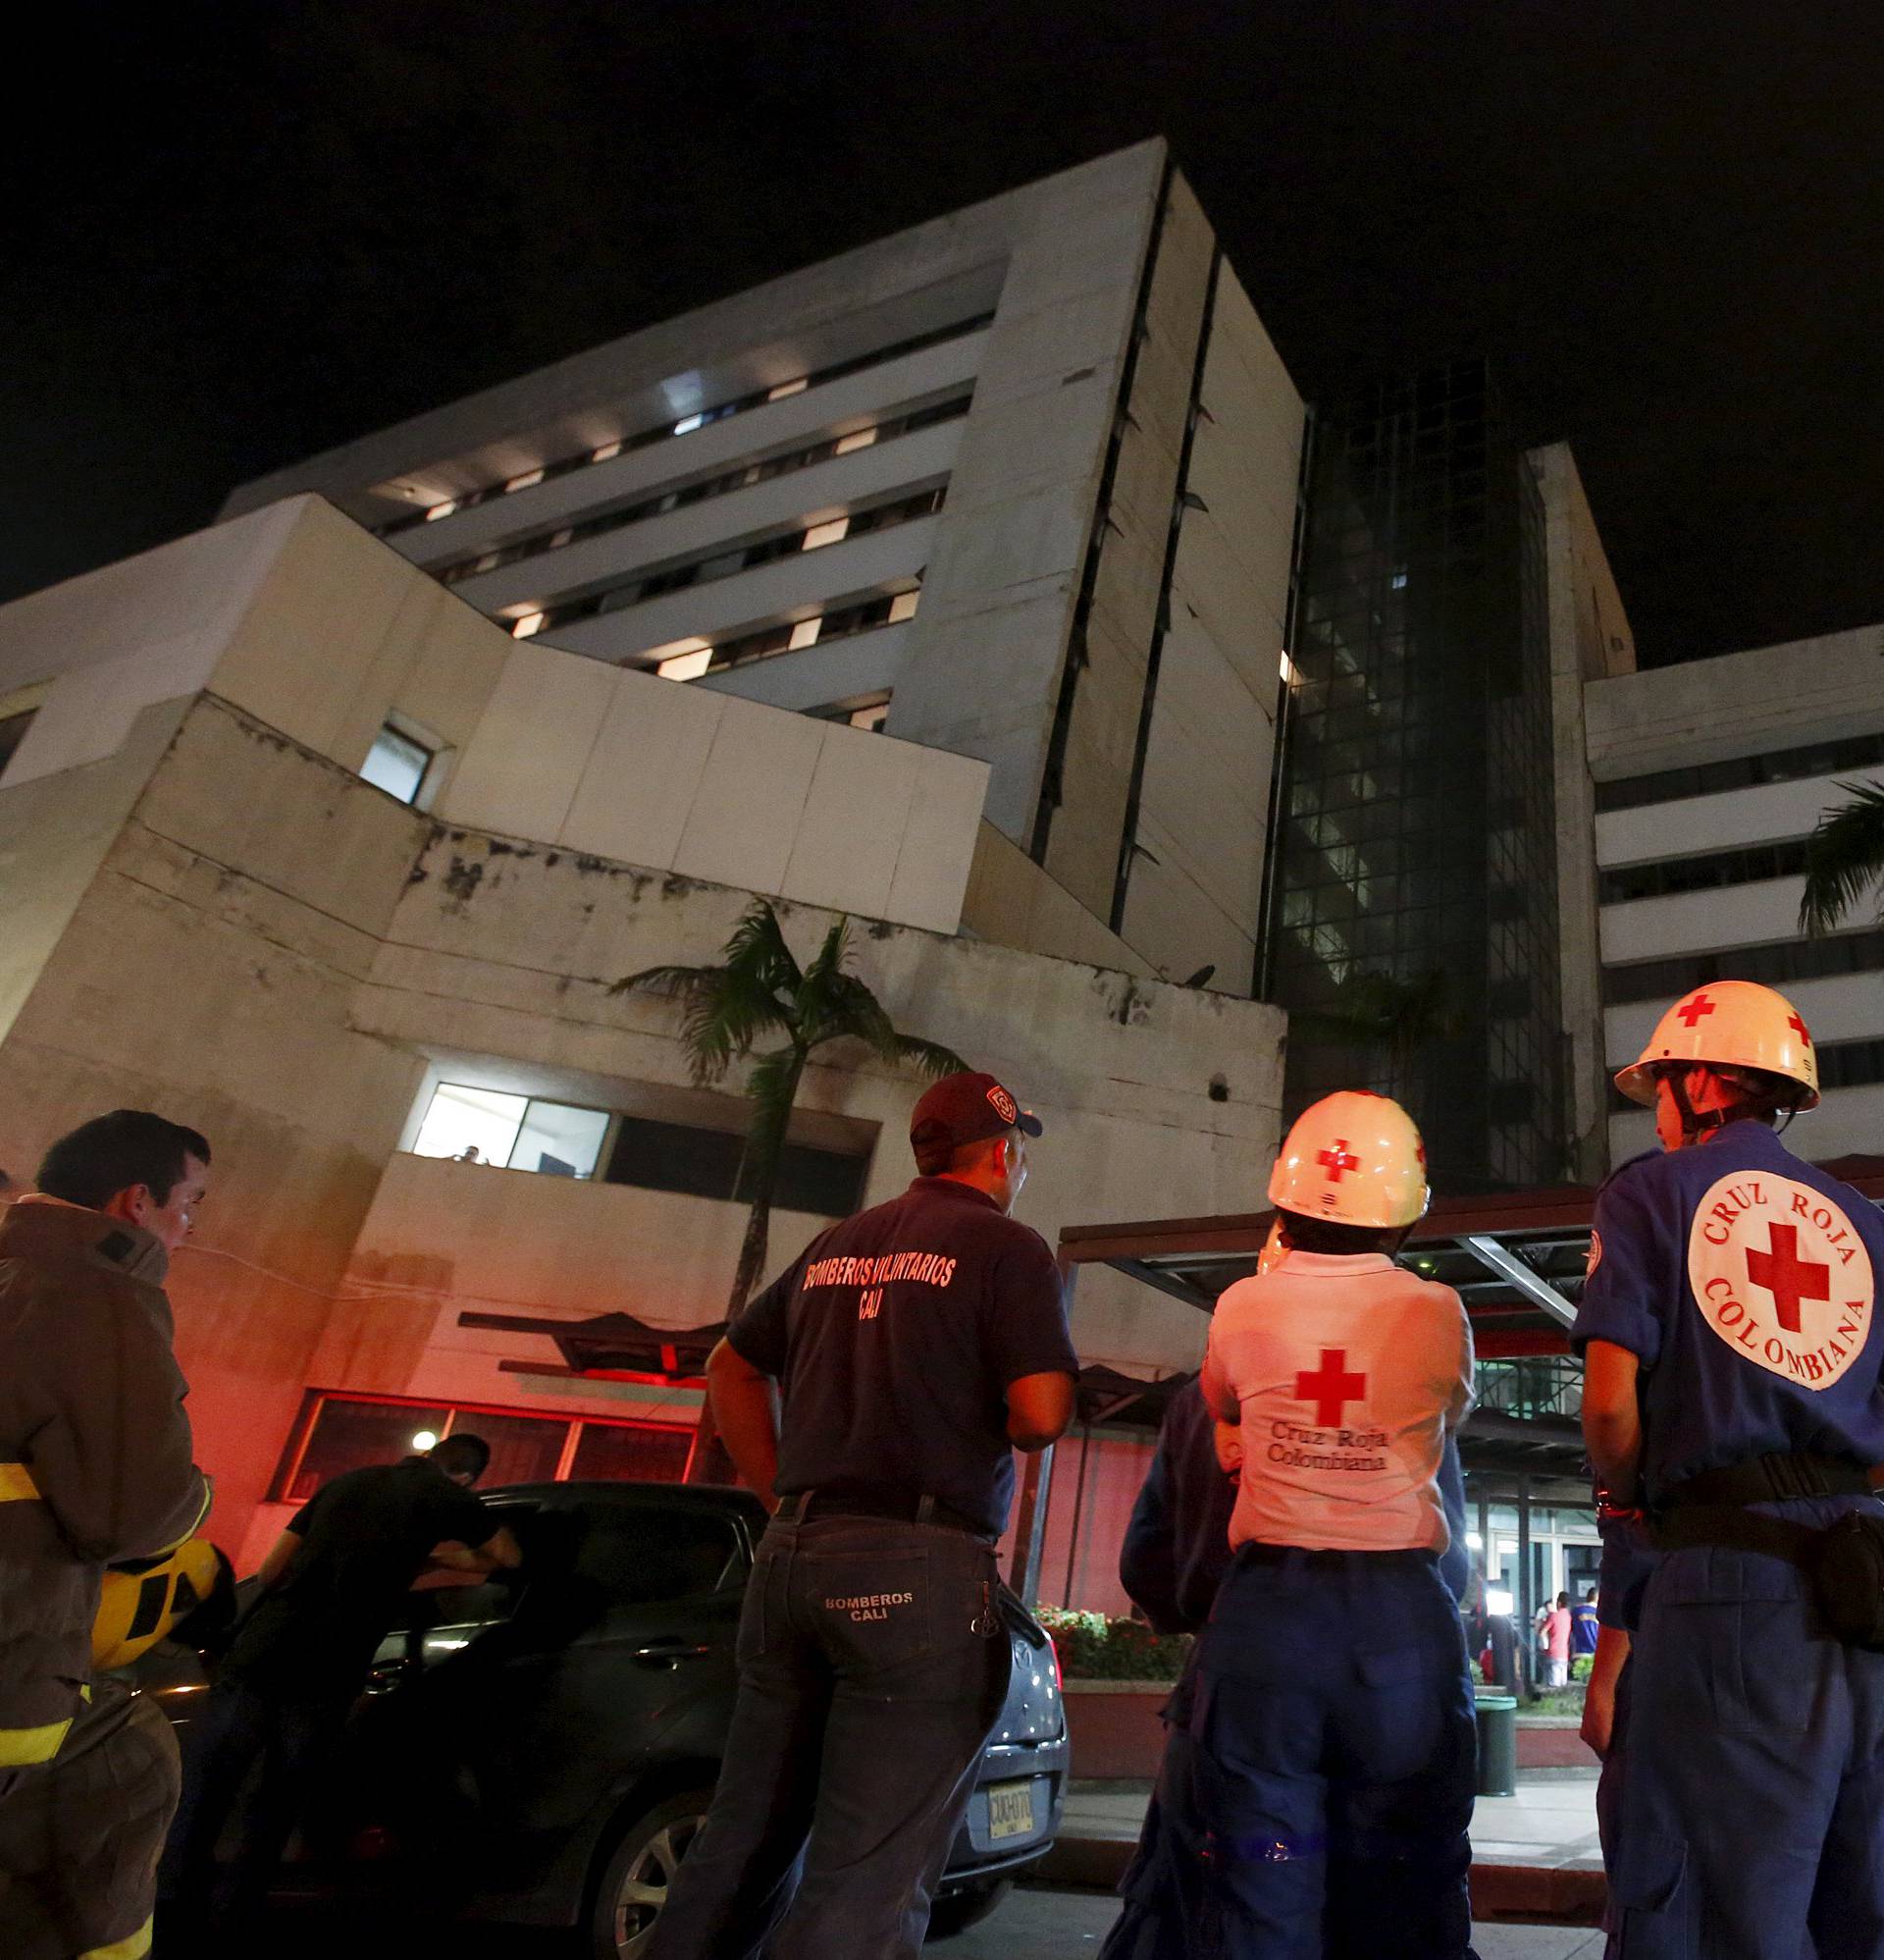 Rescue team members wait outside a clinic that was evacuated after tremors were felt resulting from an earthquake in Ecuador, in Cali, Colombia